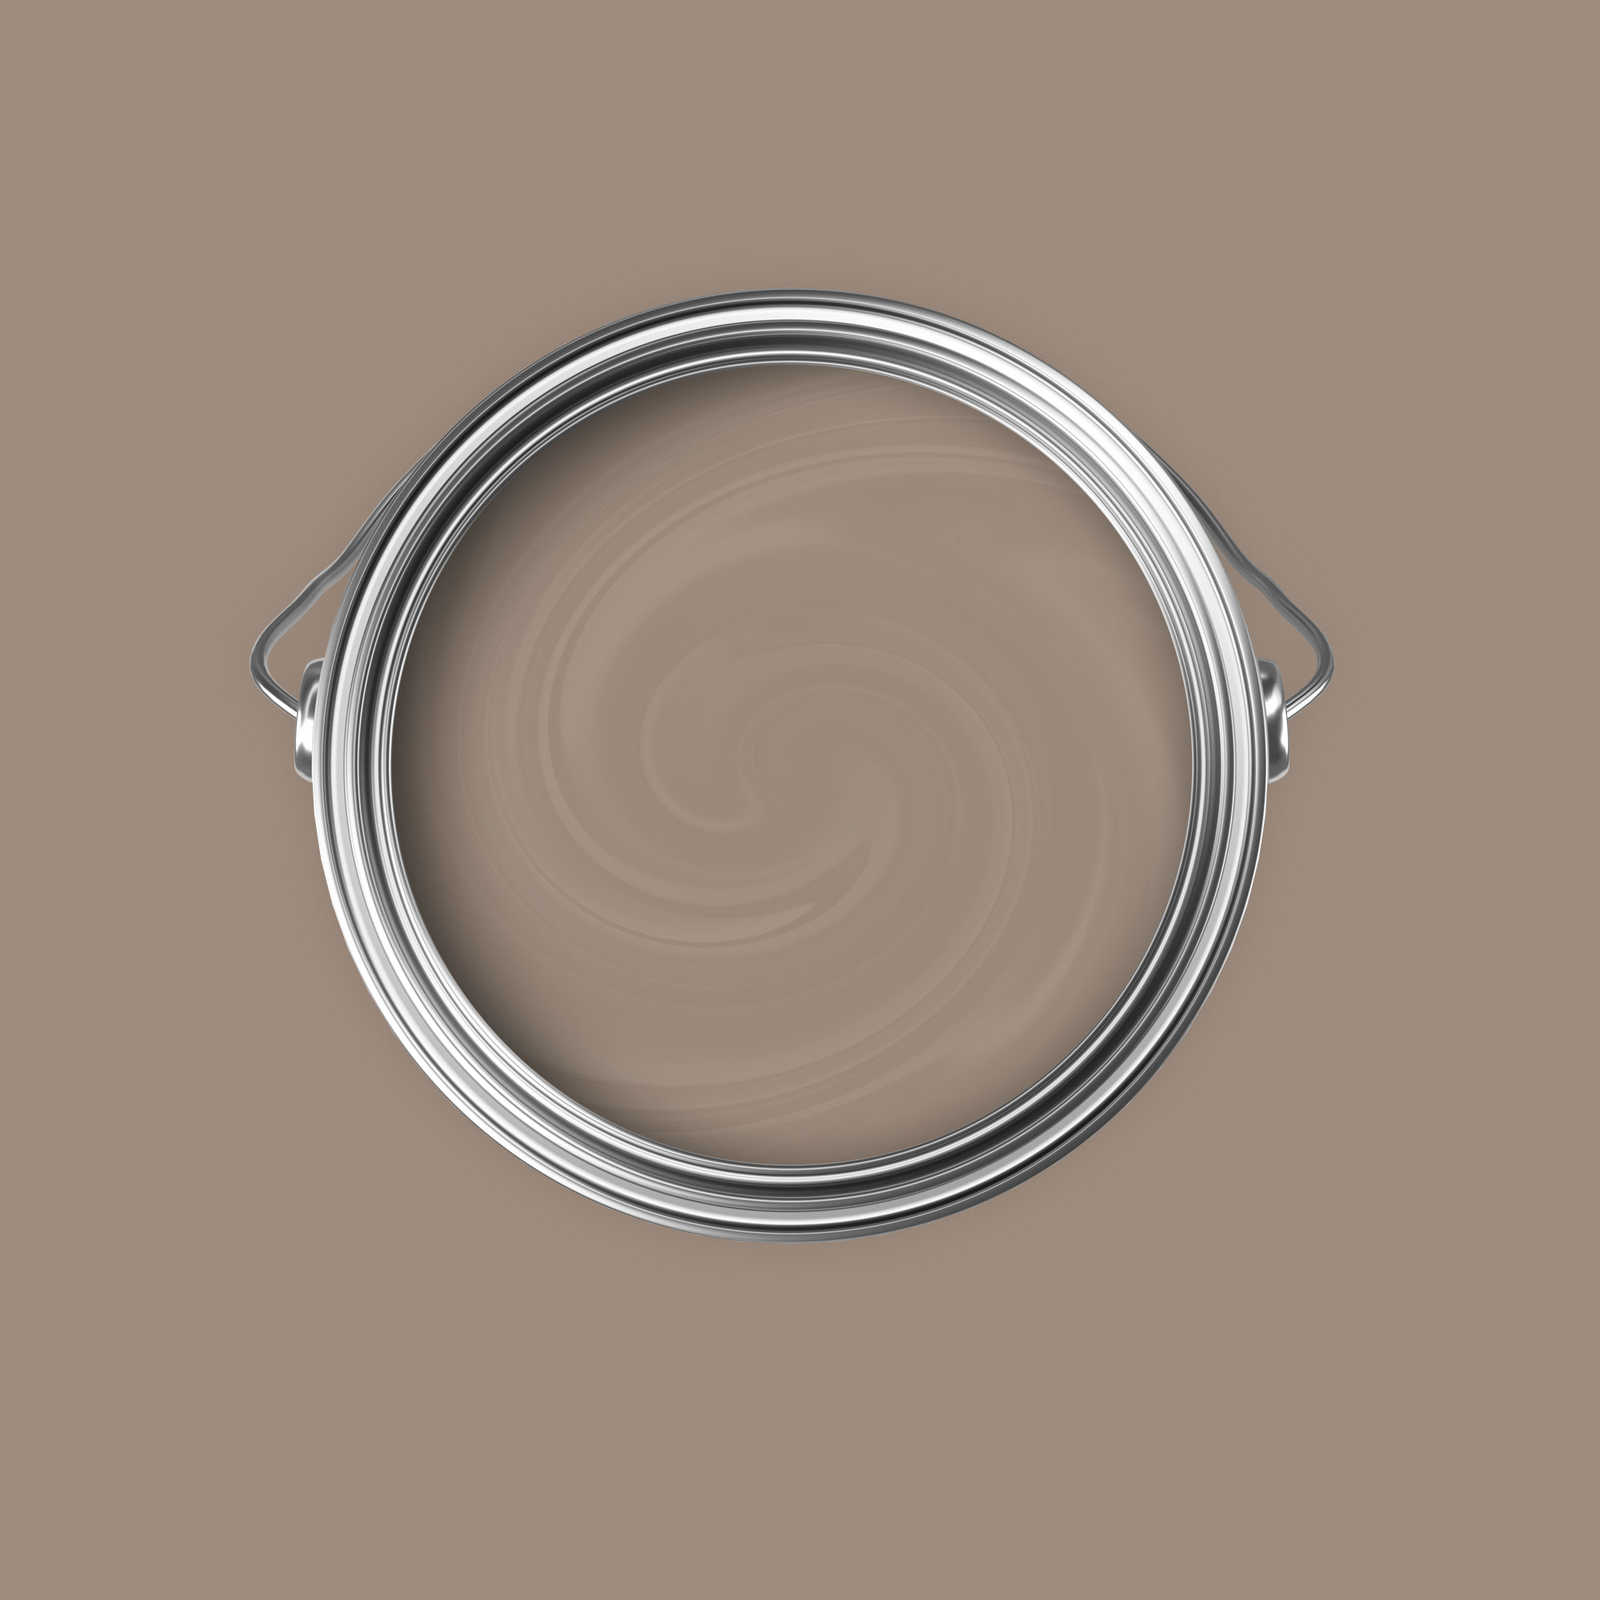             Premium Wandfarbe bodenständiges Taupe »Talented calm taupe« NW702 – 5 Liter
        